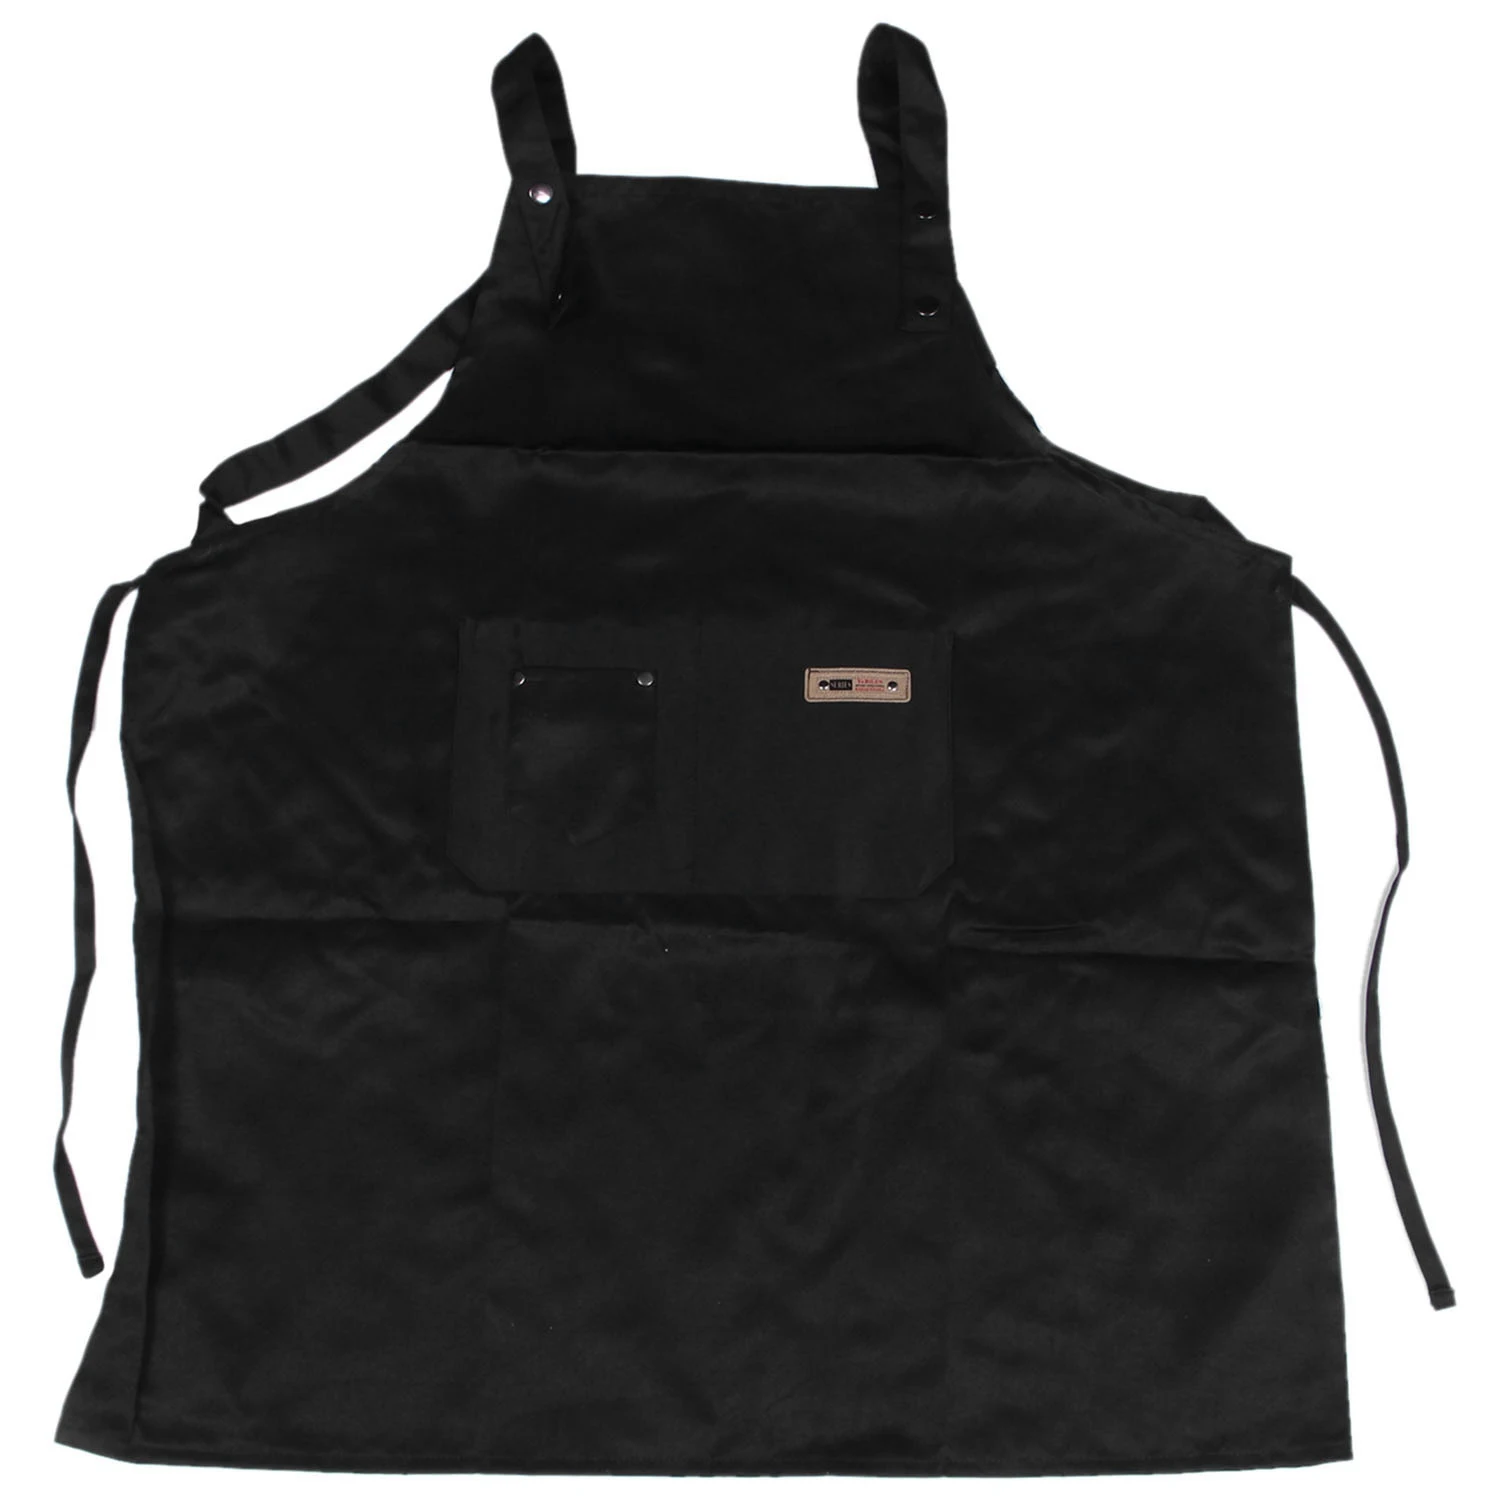 

A Black Professional Stylist Apron Waterproof Hairdressing Coloring Shampoo Haircuts Cloth Wrap Hair Salon Tool